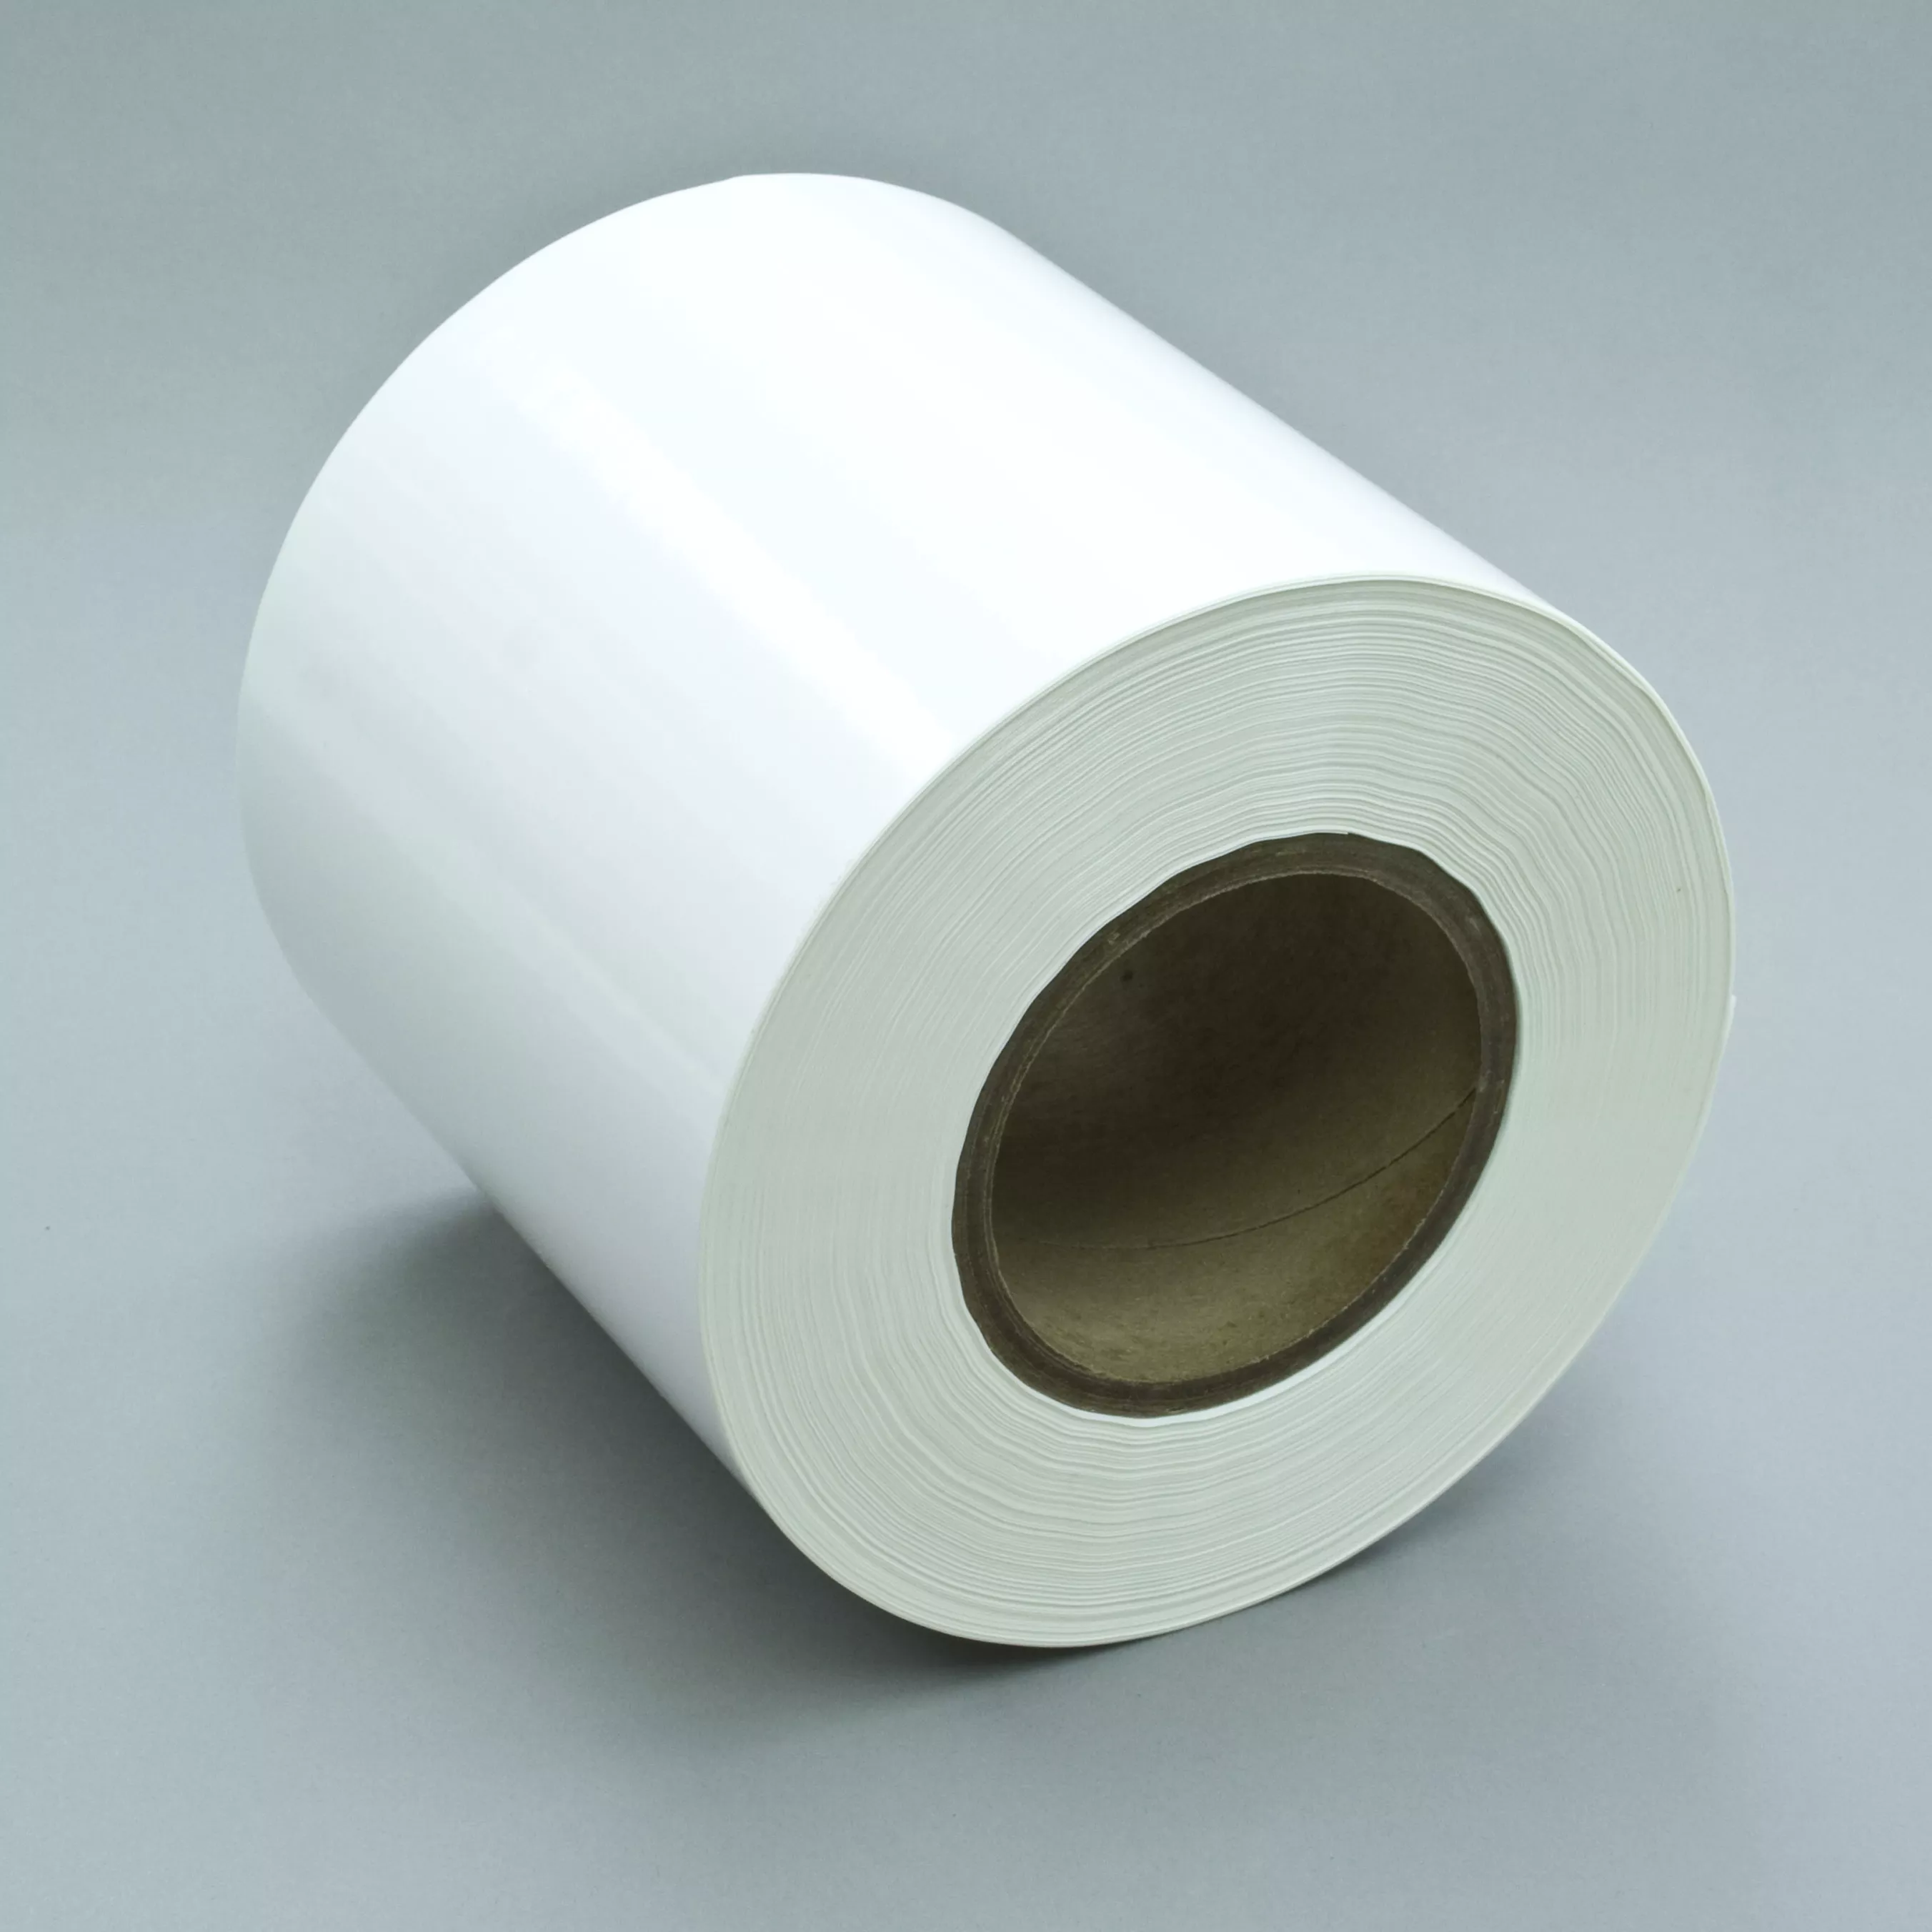 3M™ Thermal Transfer Label Material OFM2902, Brushed Silver Polyester, 6
in x 1668 ft, 1 Roll/Case